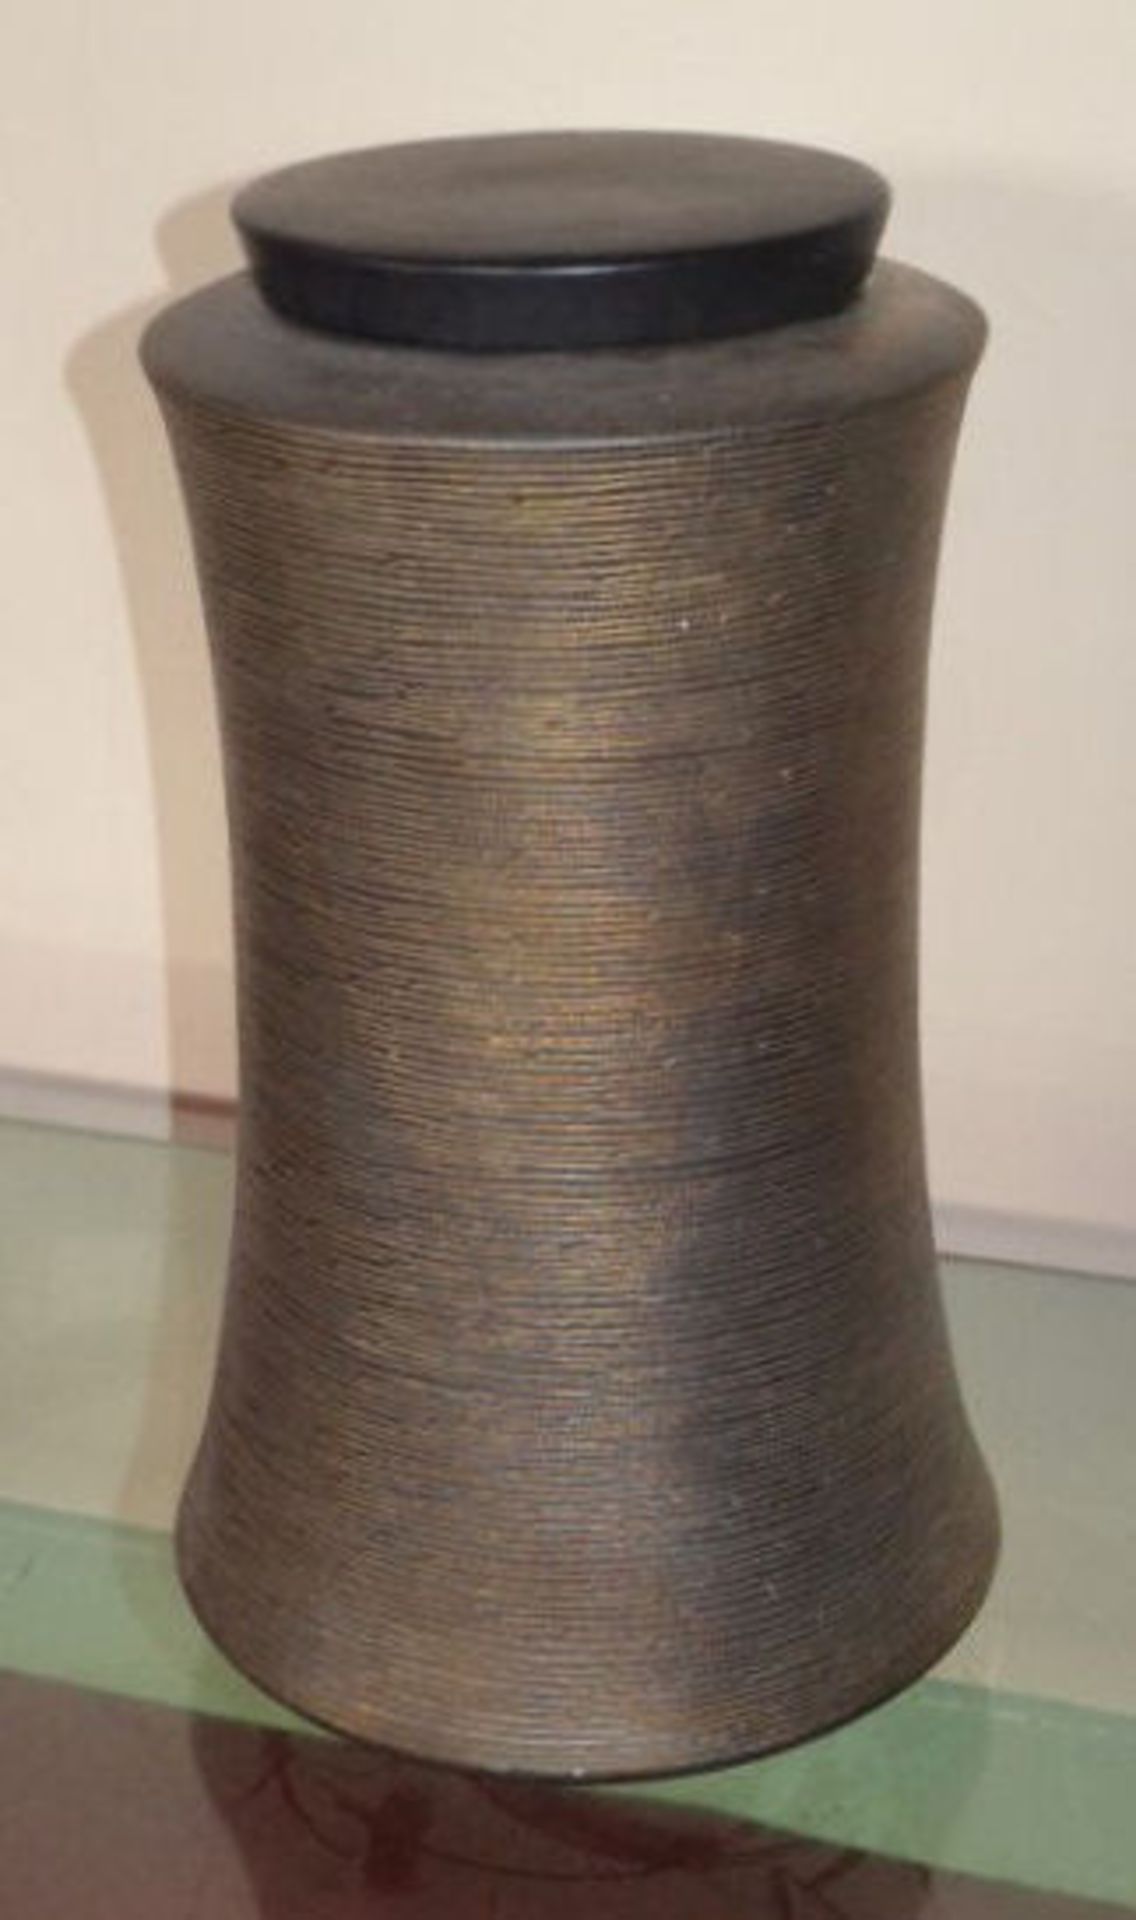 1 x Large Metal Urn In Bronze/Copper Colour. 53cm Tall. 28cm Diameter At Top And 31cm At Bottom.